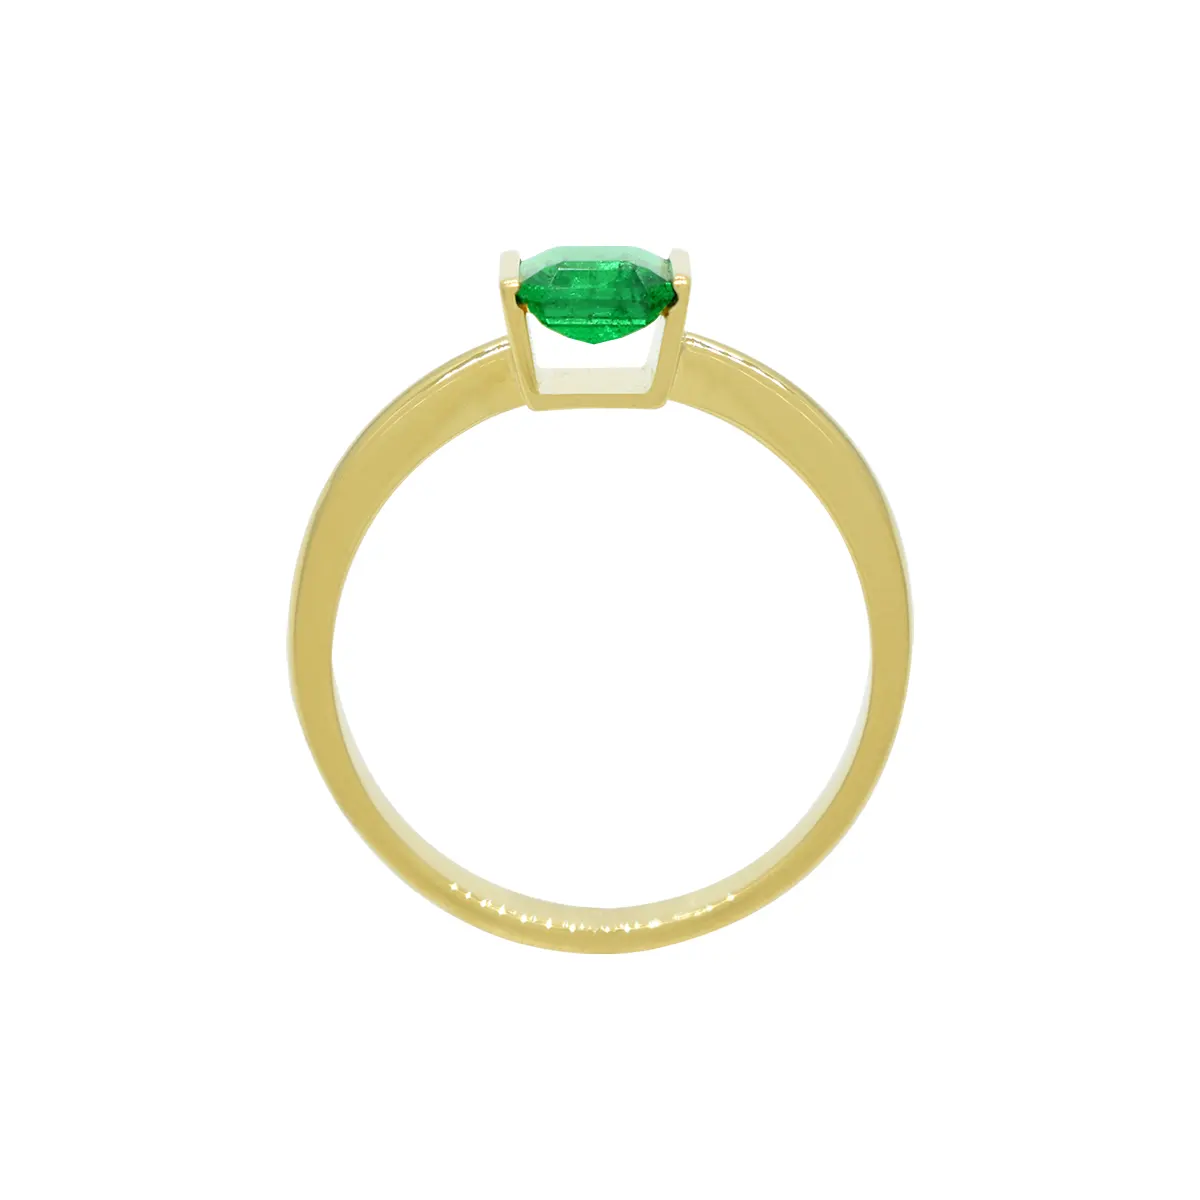 Emerald Cut Emerald Solitaire Ring in 18K Yellow Gold Tension Setting 